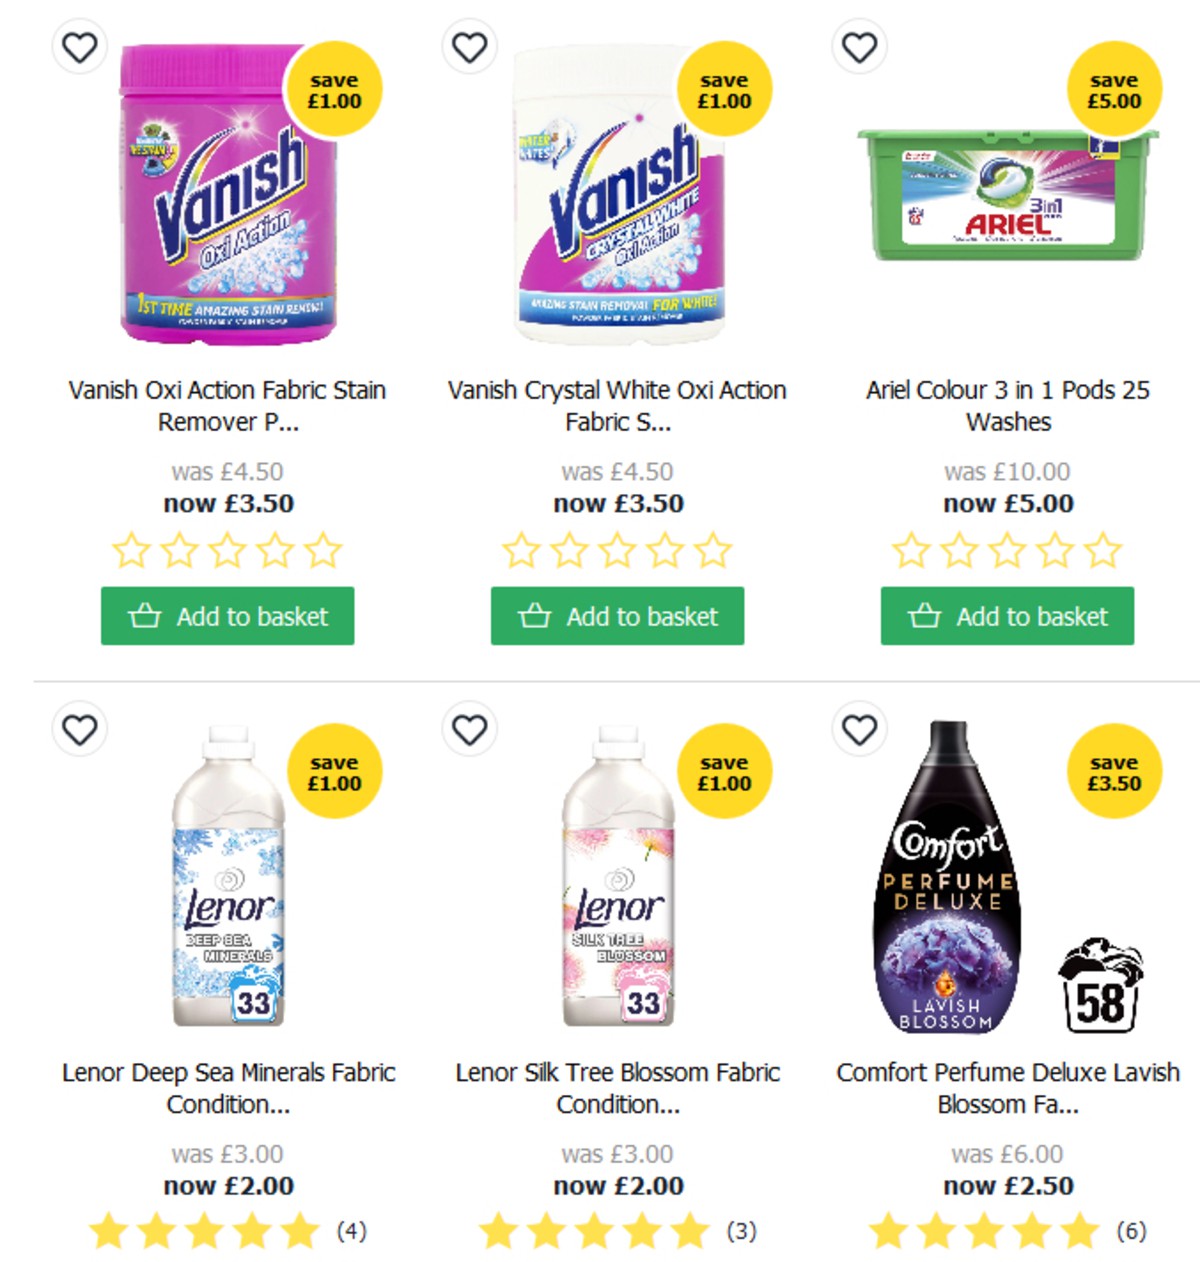 Wilko Offers from 16 May